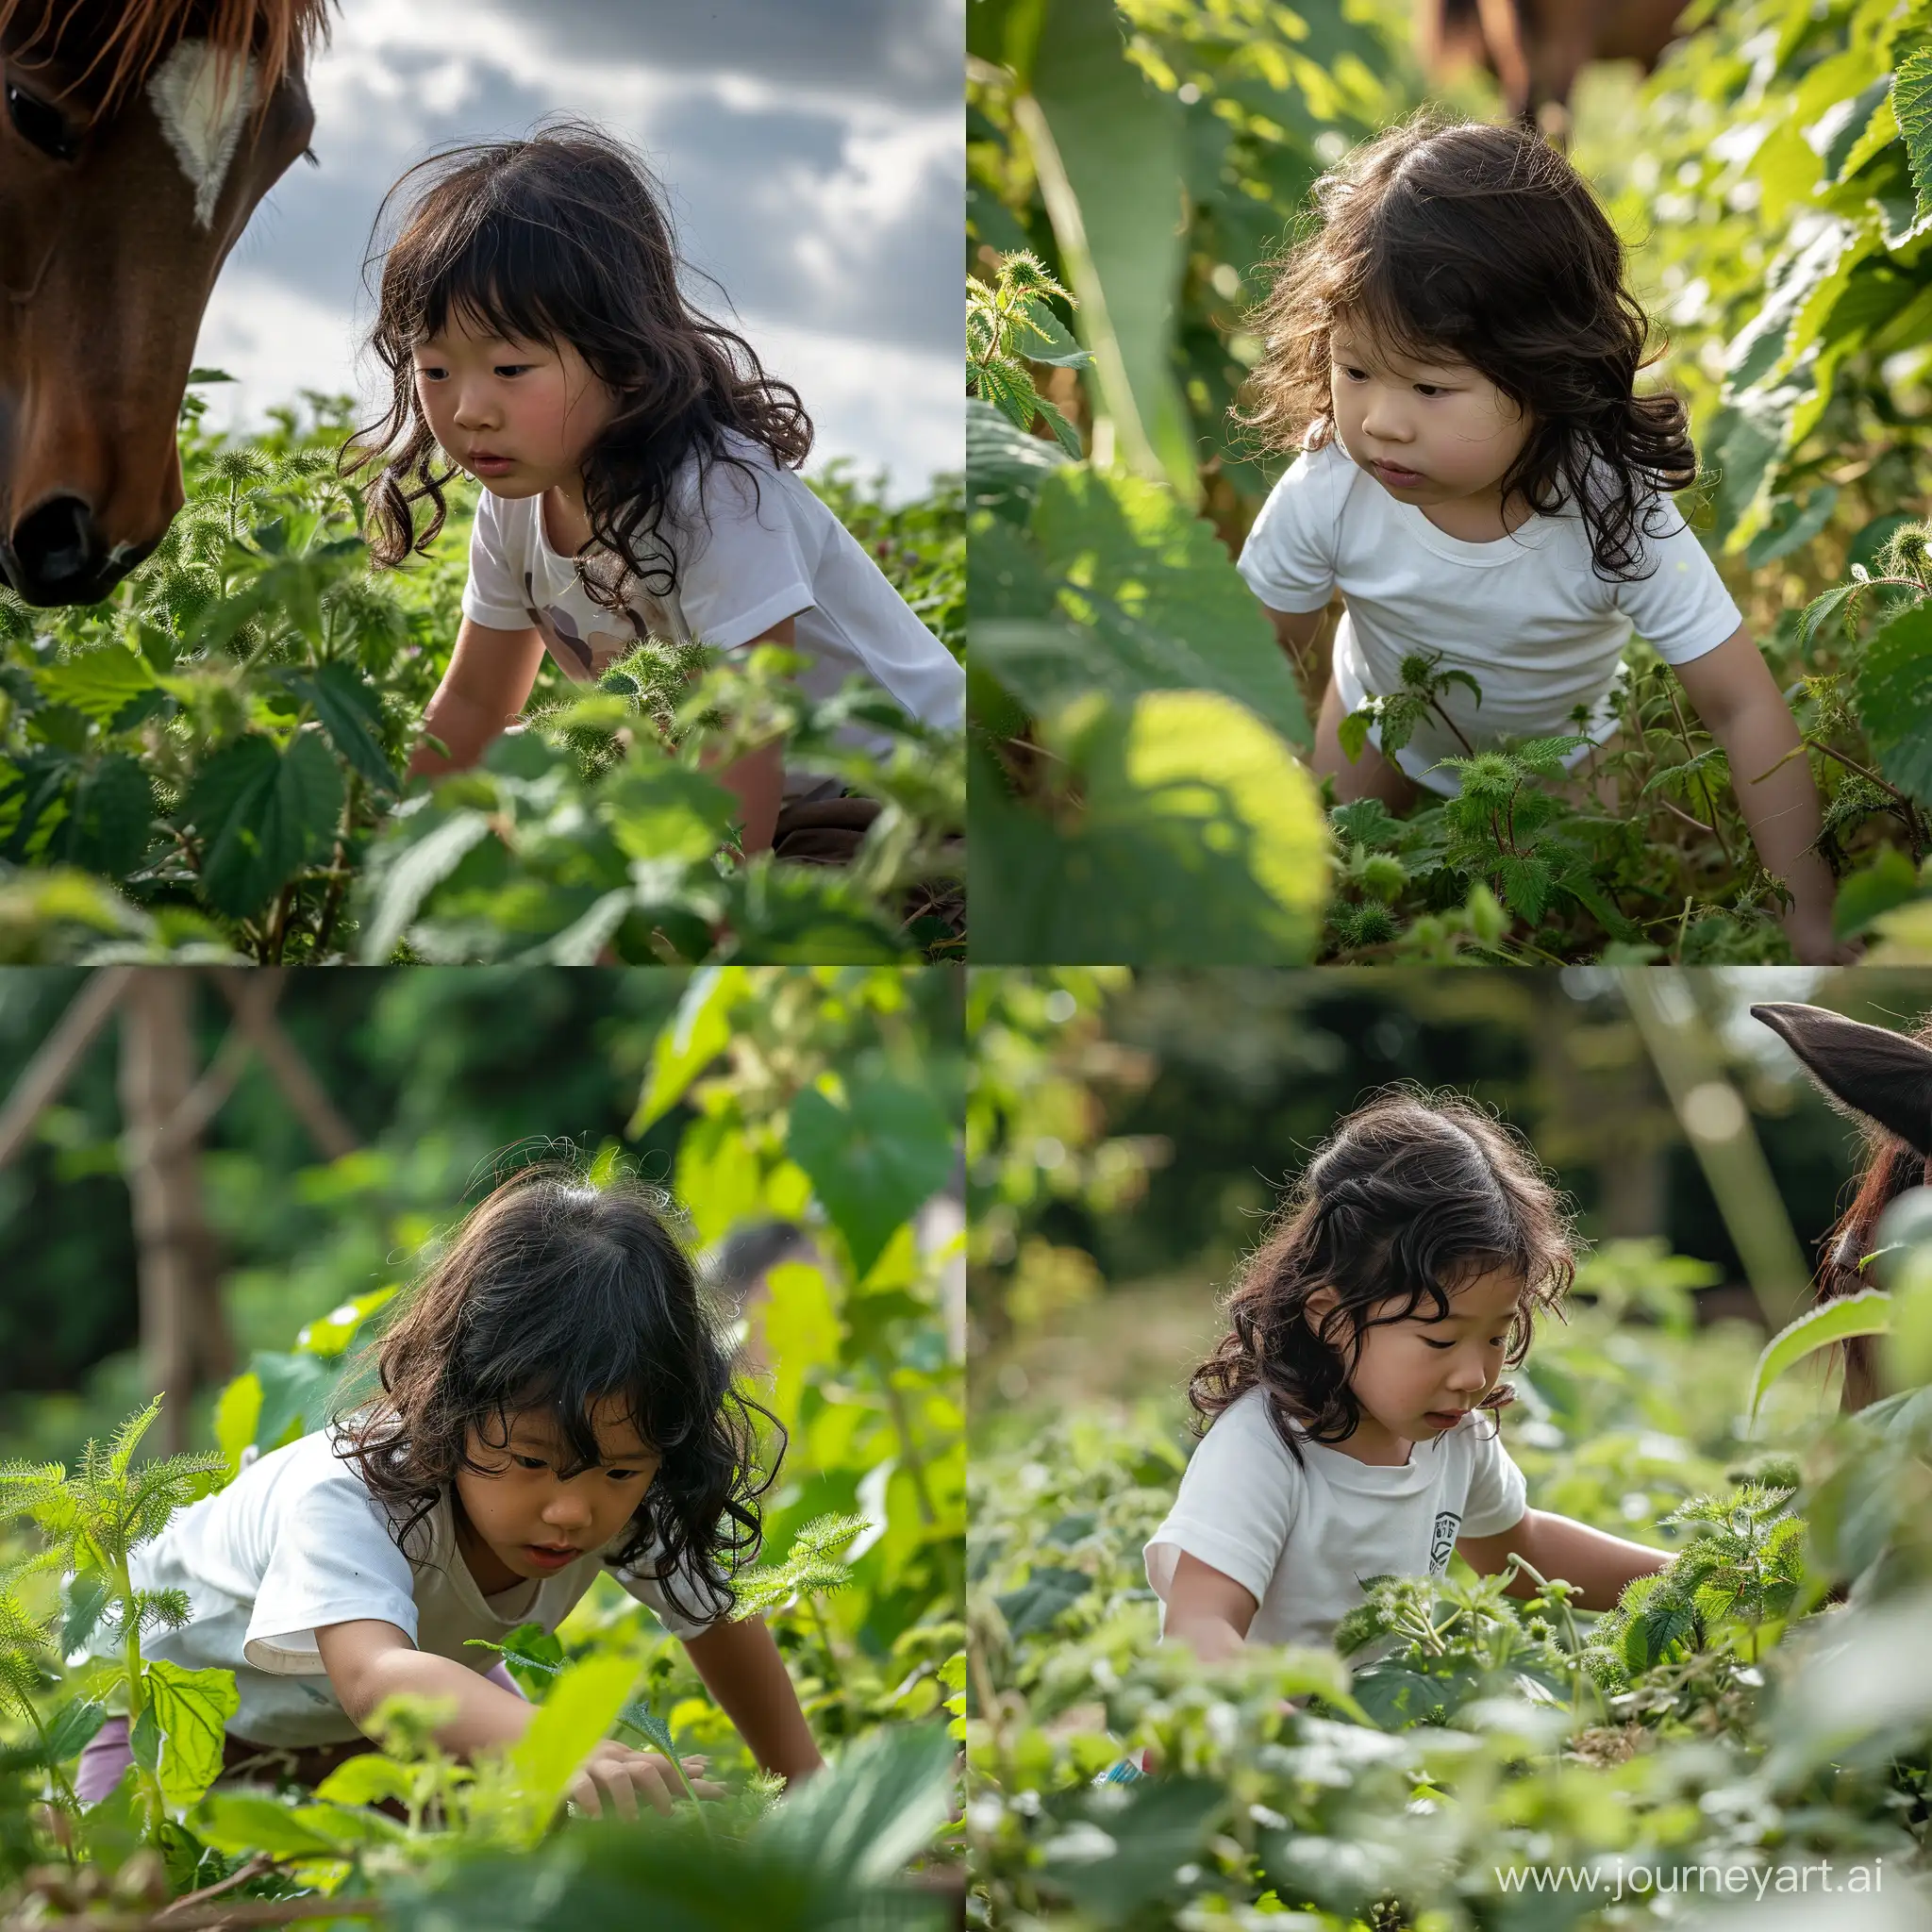 A little girl in a white T-shirt, 4k, with black wavy hair, falls from a horse into nettles,